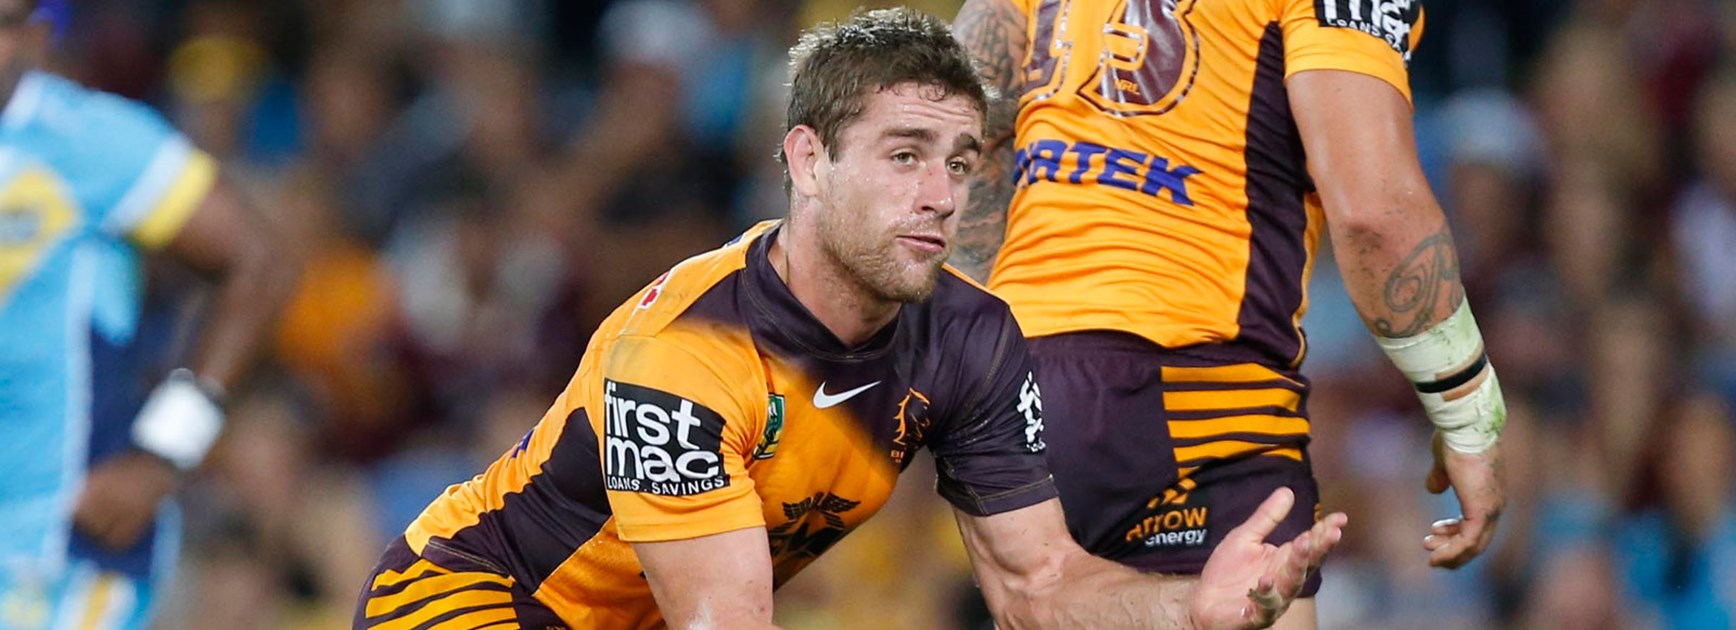 Brisbane hooker Andrew McCullough has inked a new two-year deal with the Broncos.